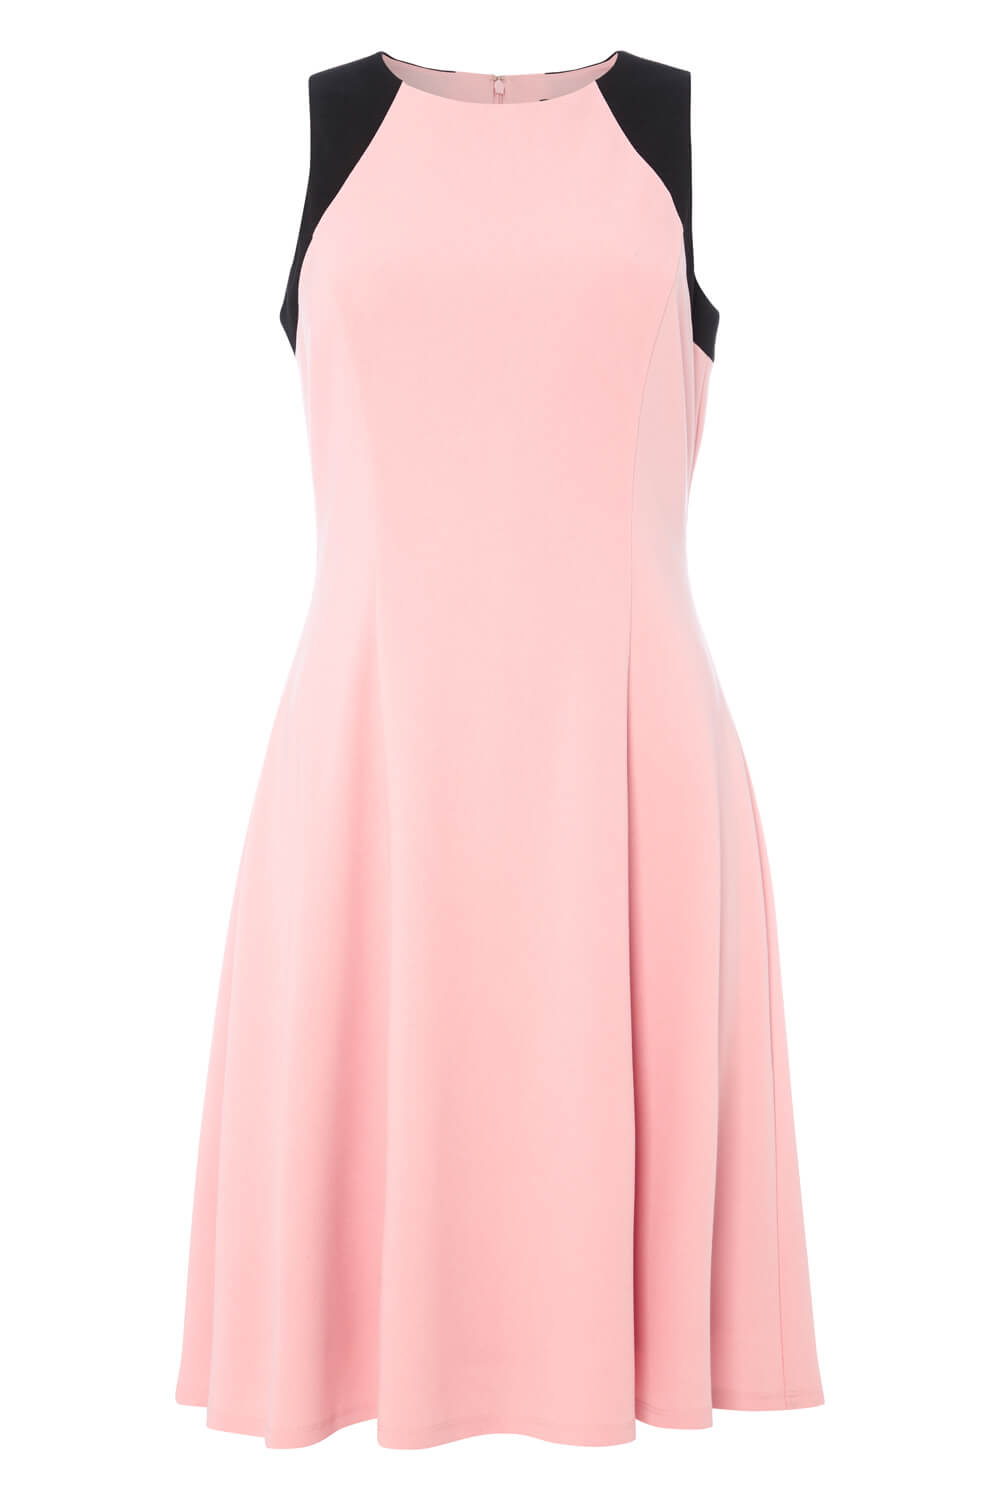 Light Pink Colour Block Fit and Flare Dress, Image 3 of 3